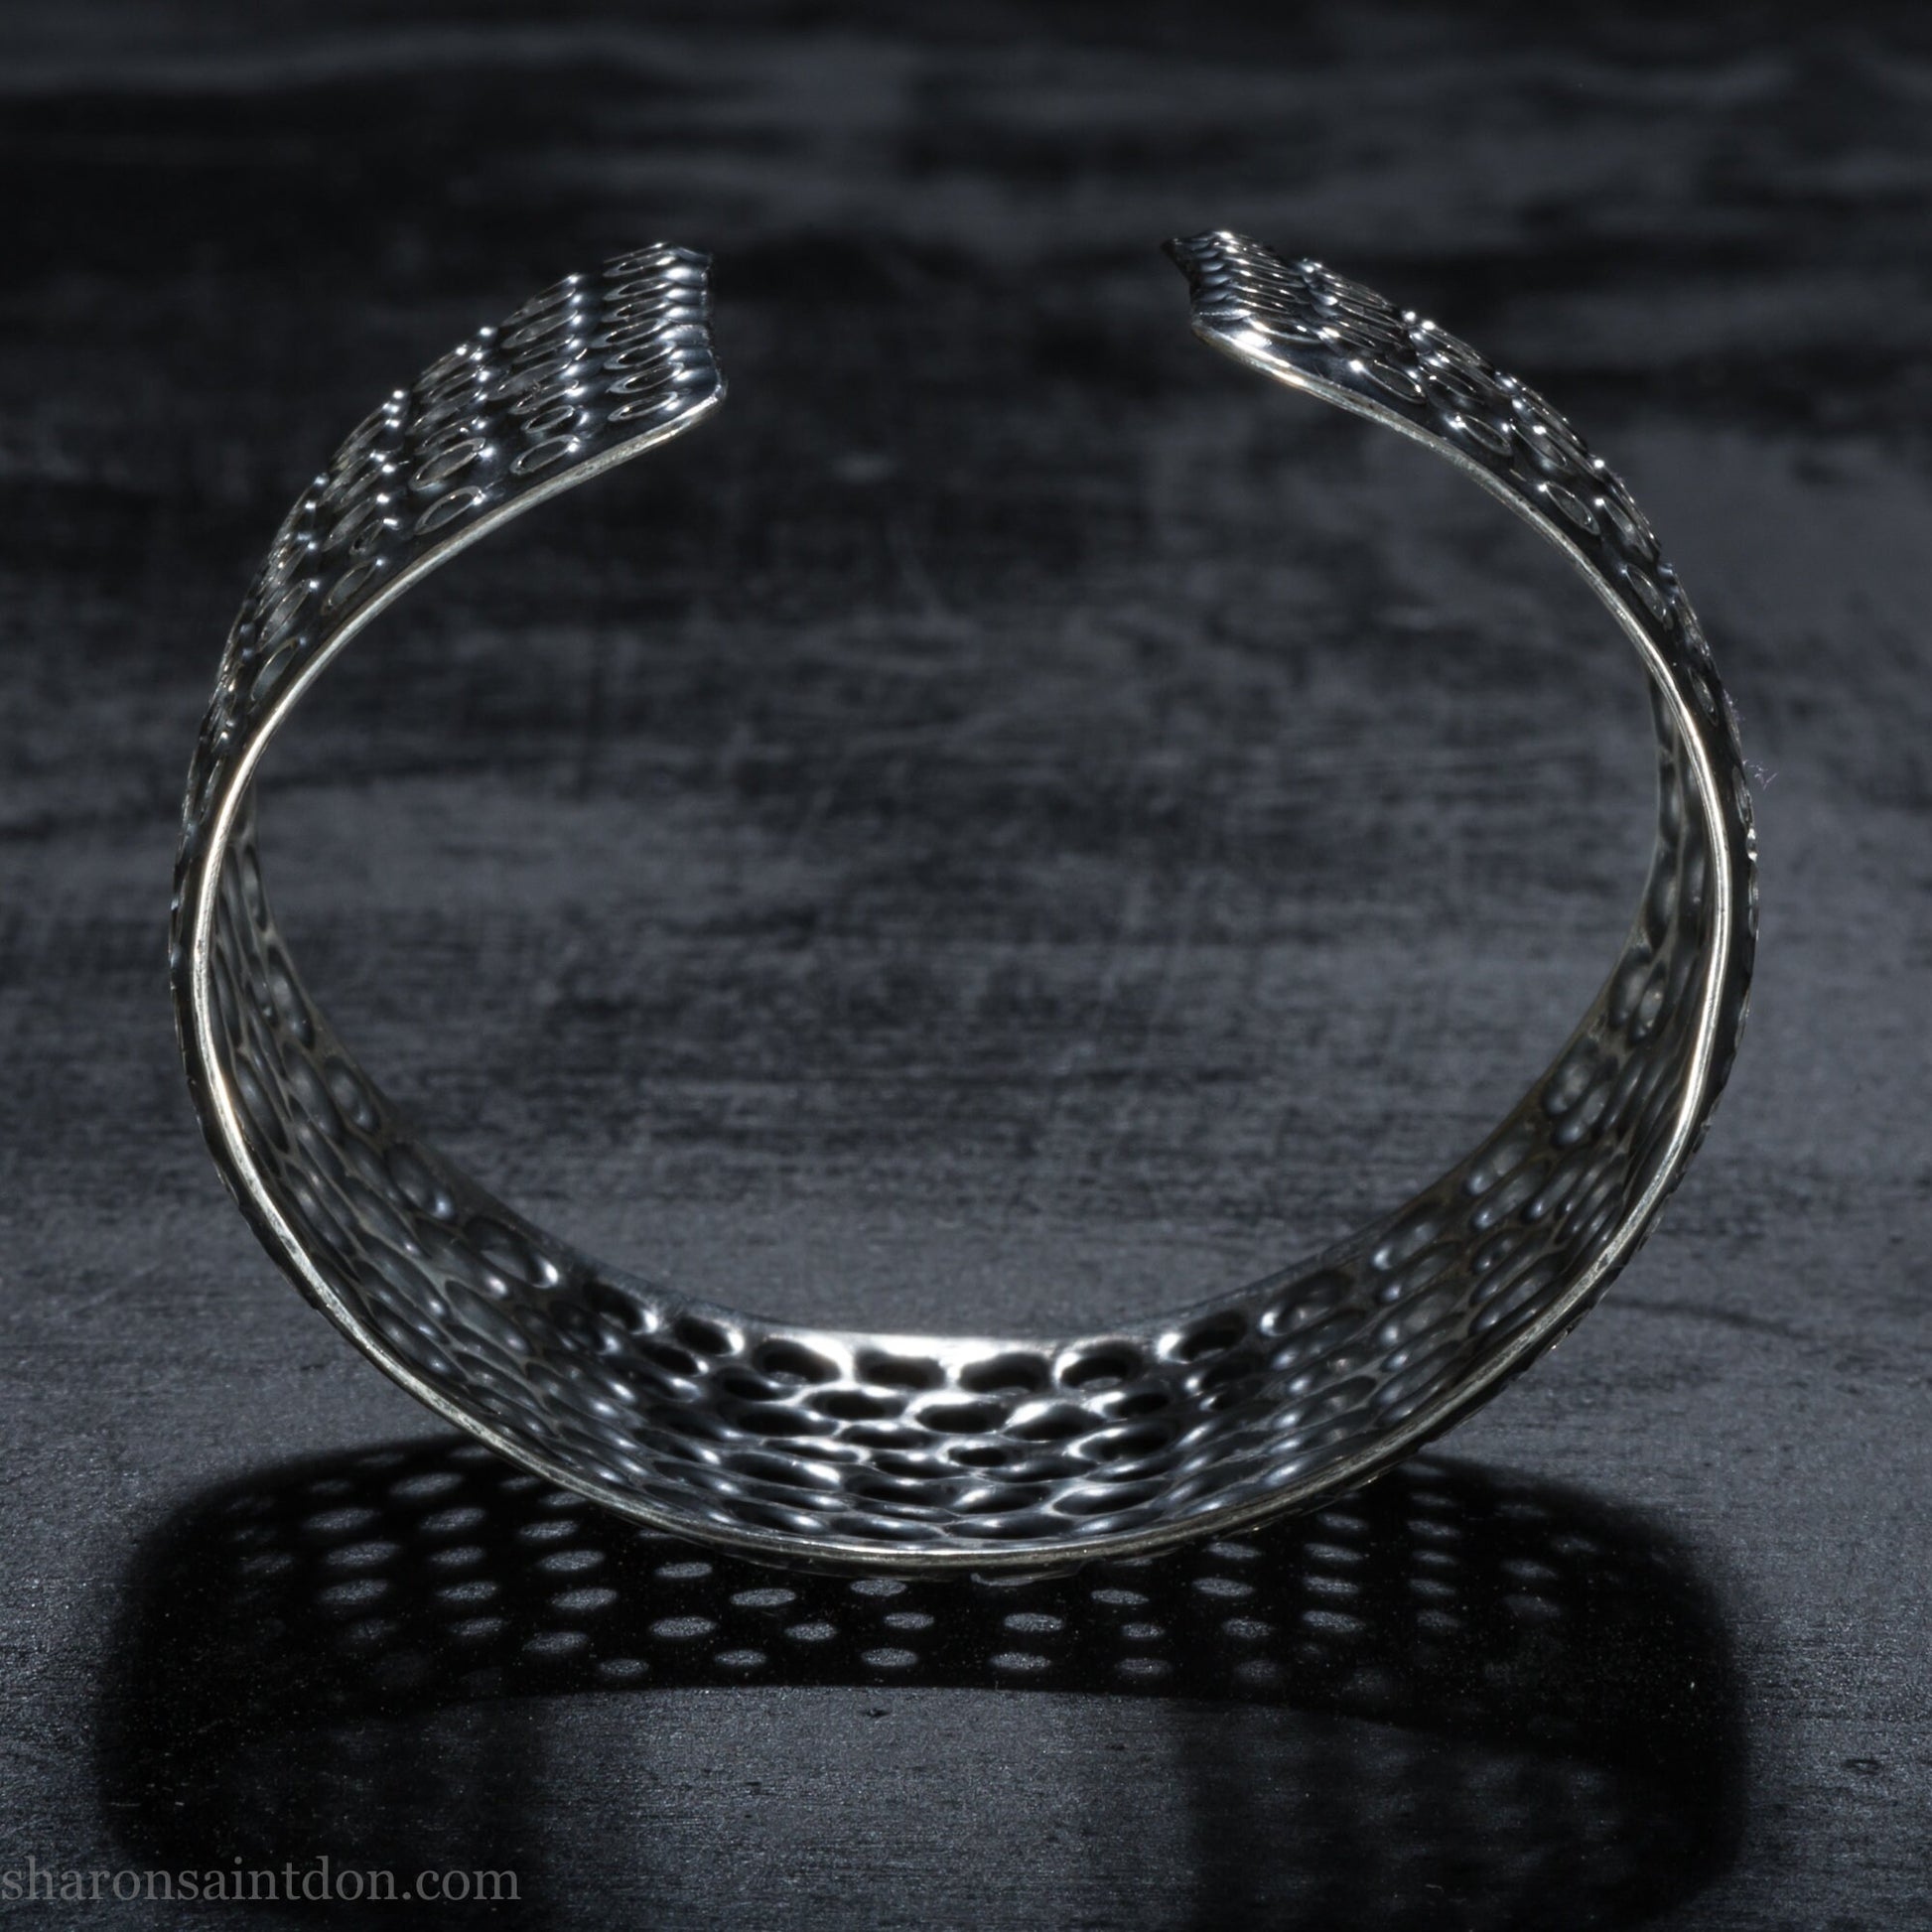 925 sterling silver cuff bracelet handmade in USA. 4cm wide, 40cm x 60cm oval with approximately 28mm flexible opening for wrist. Punched perforated hole texture, oxidized black and rubbed back to show circles as white shiny silver.